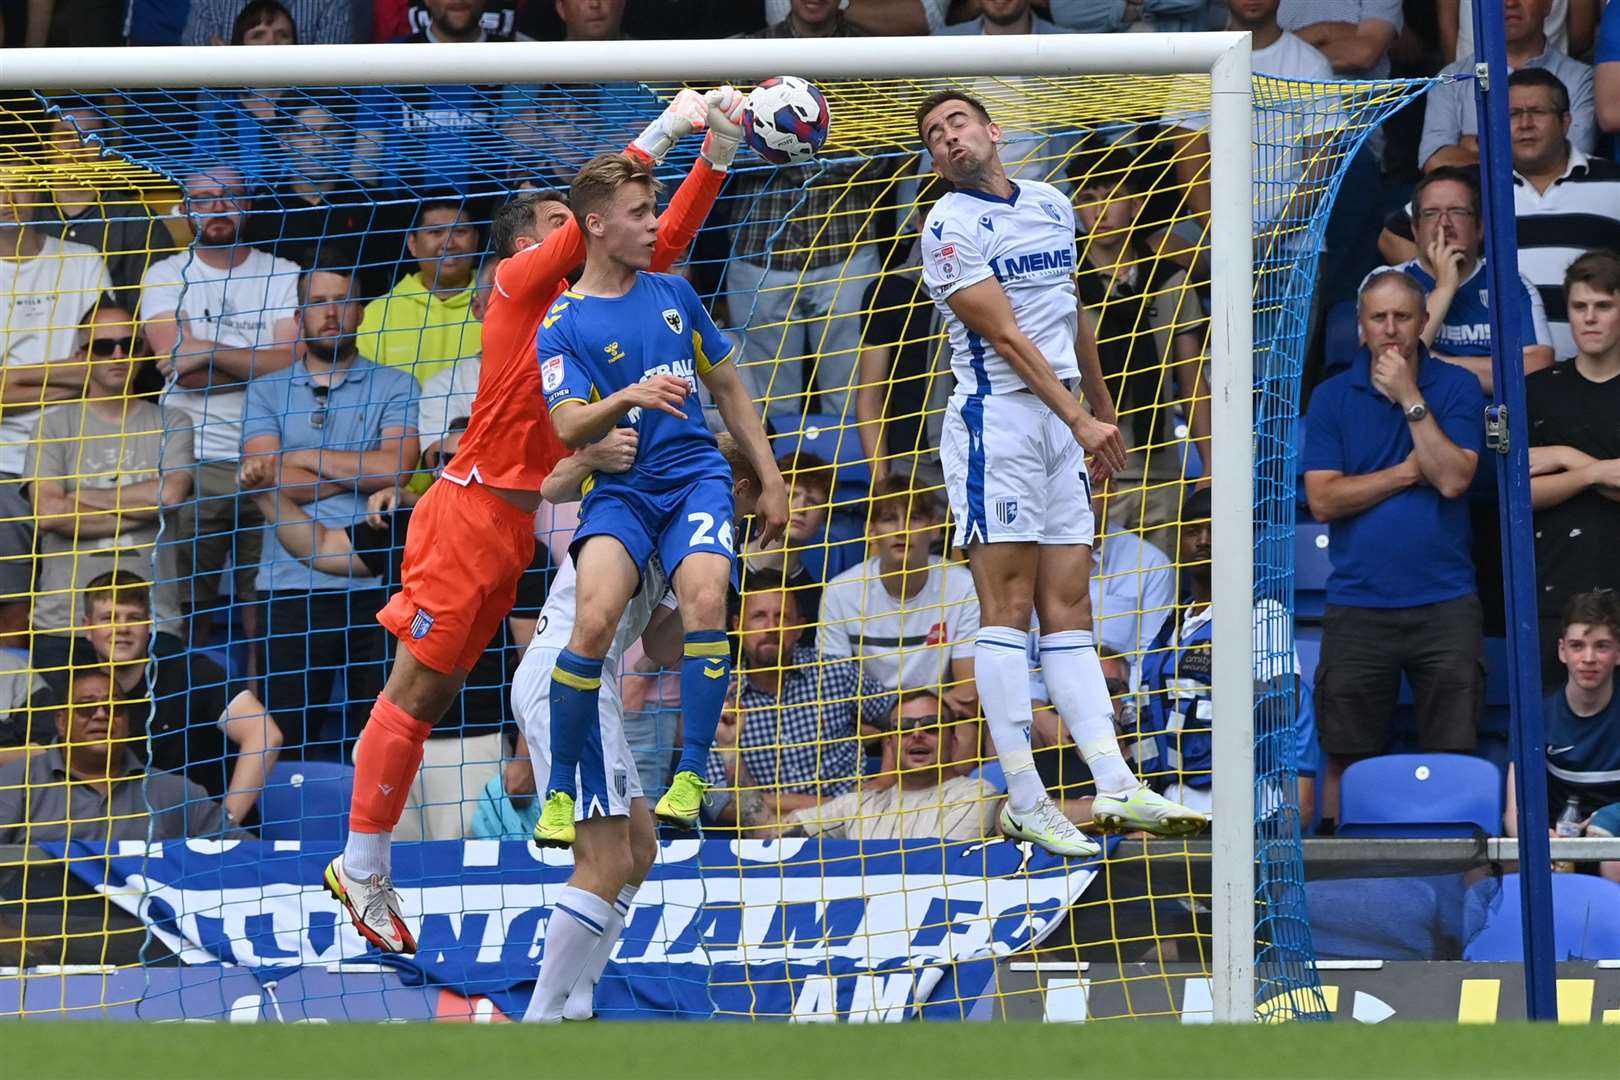 Action between Wimbledon and the Gills Picture : Keith Gillard